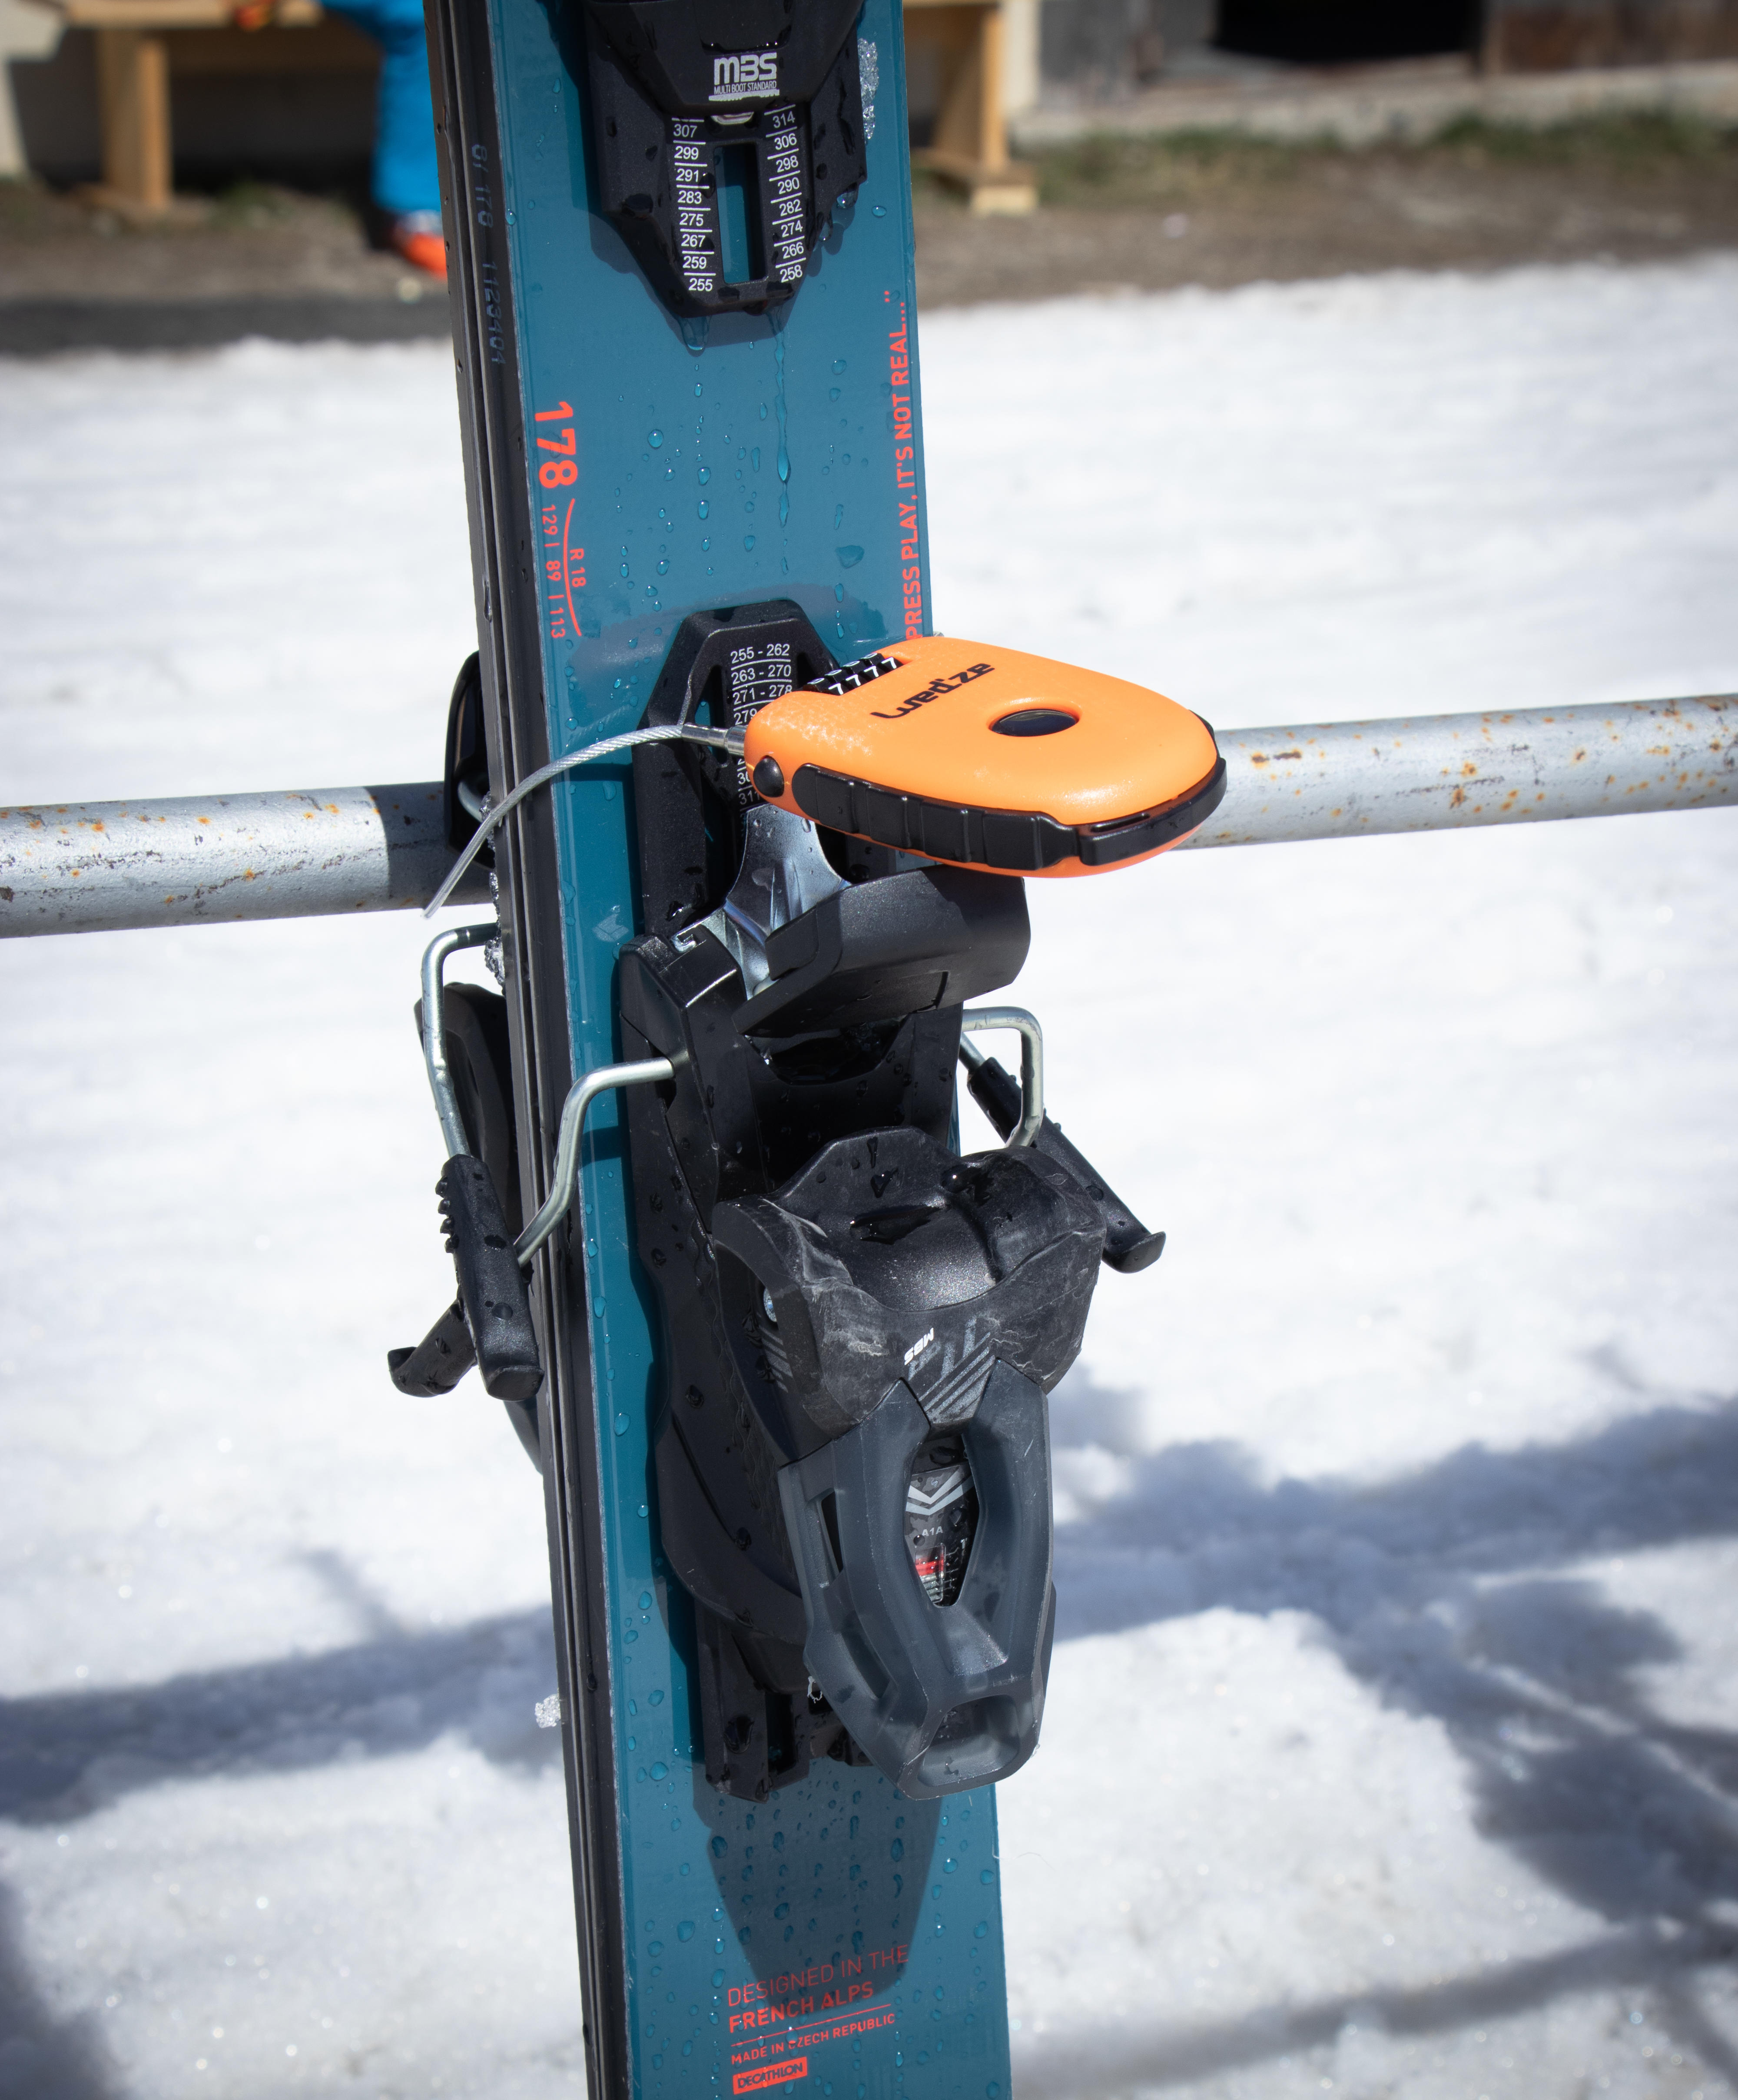 Anti-theft lock for snowboard or pair of skis DREAMSCAPE - Decathlon